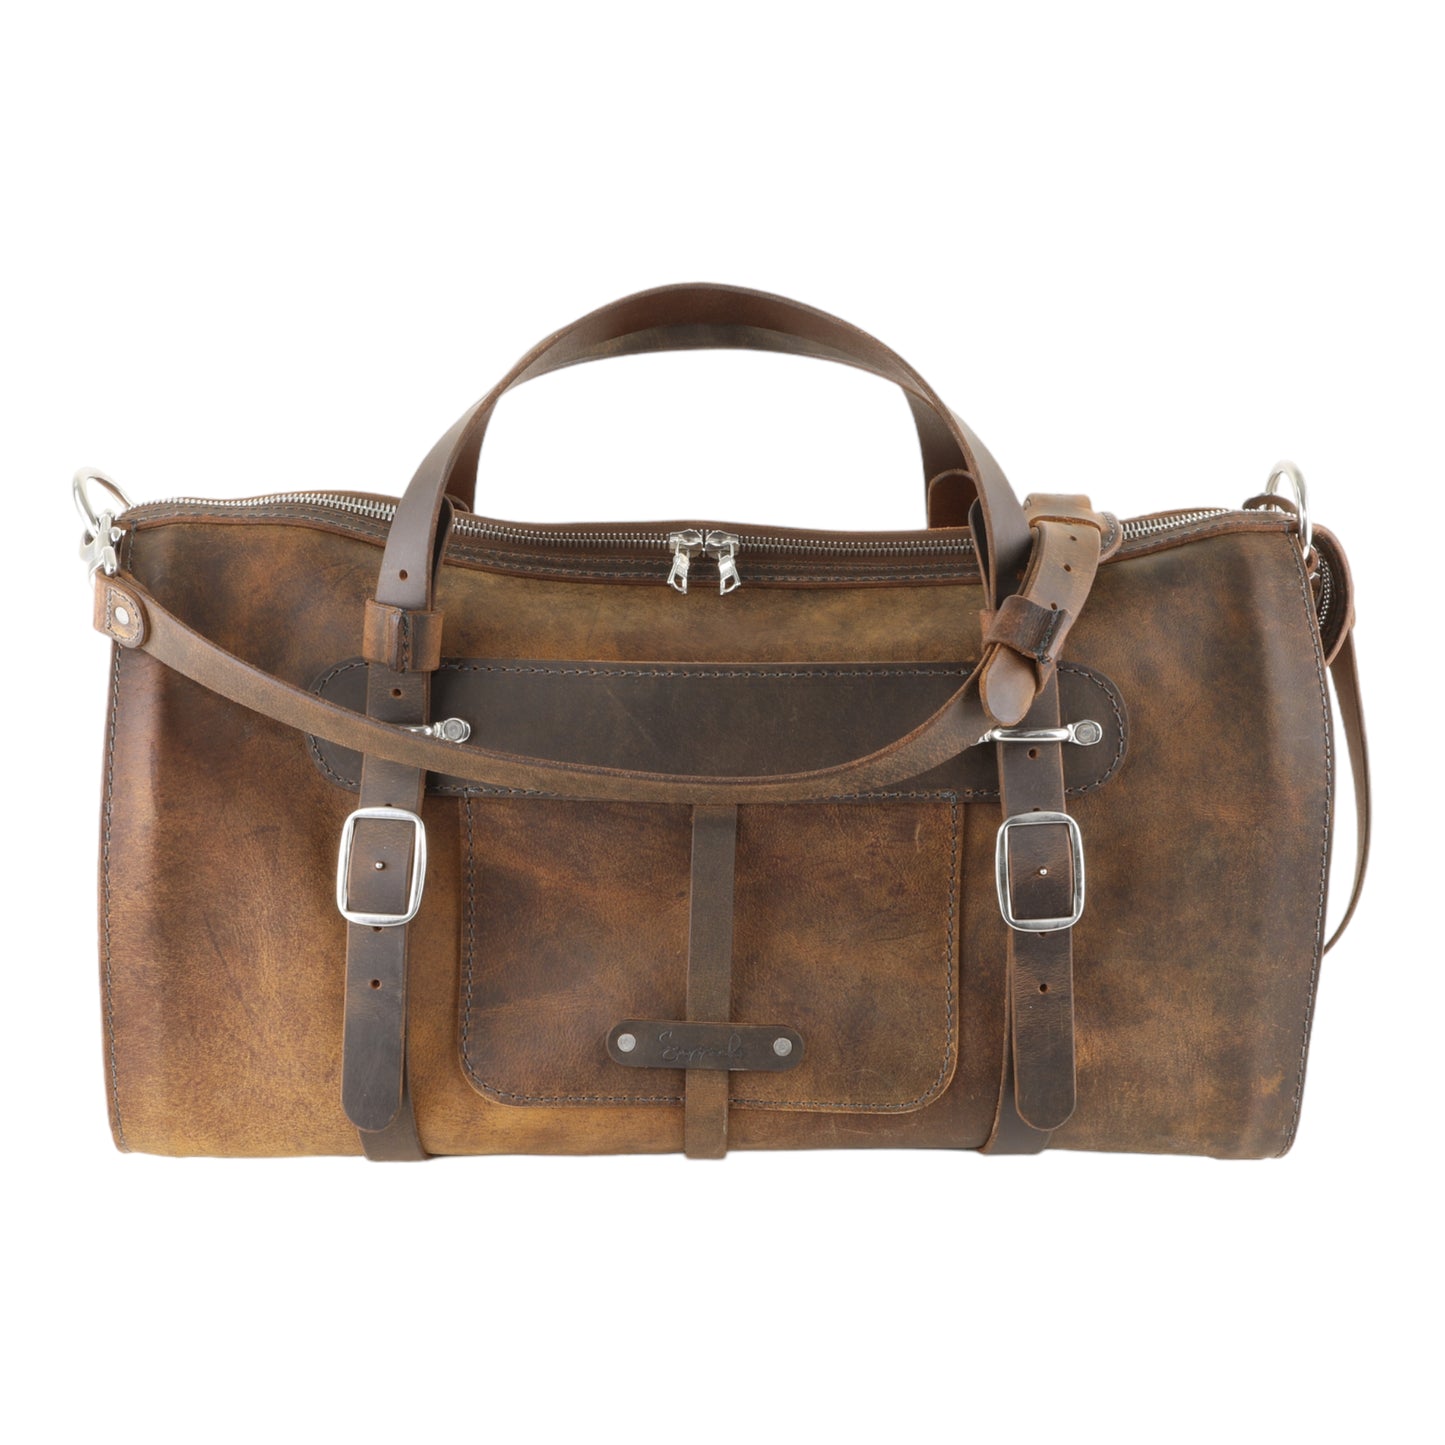 The "Rustic Voyager" Duffle Bag